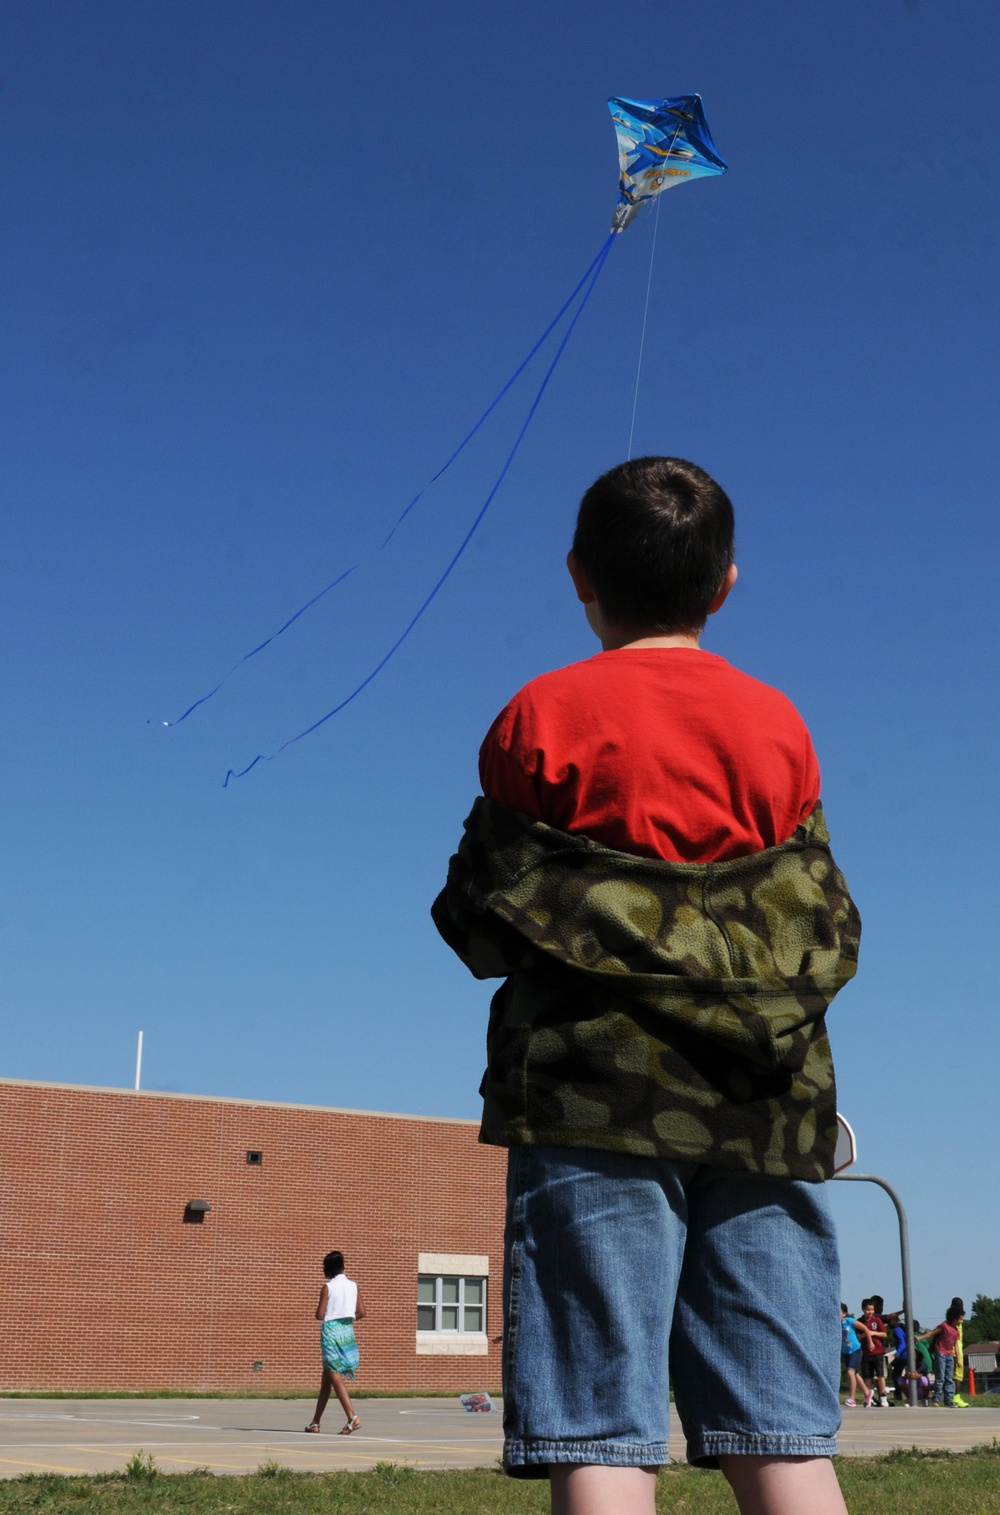 Elementary school students take to the skies, experience kite flying